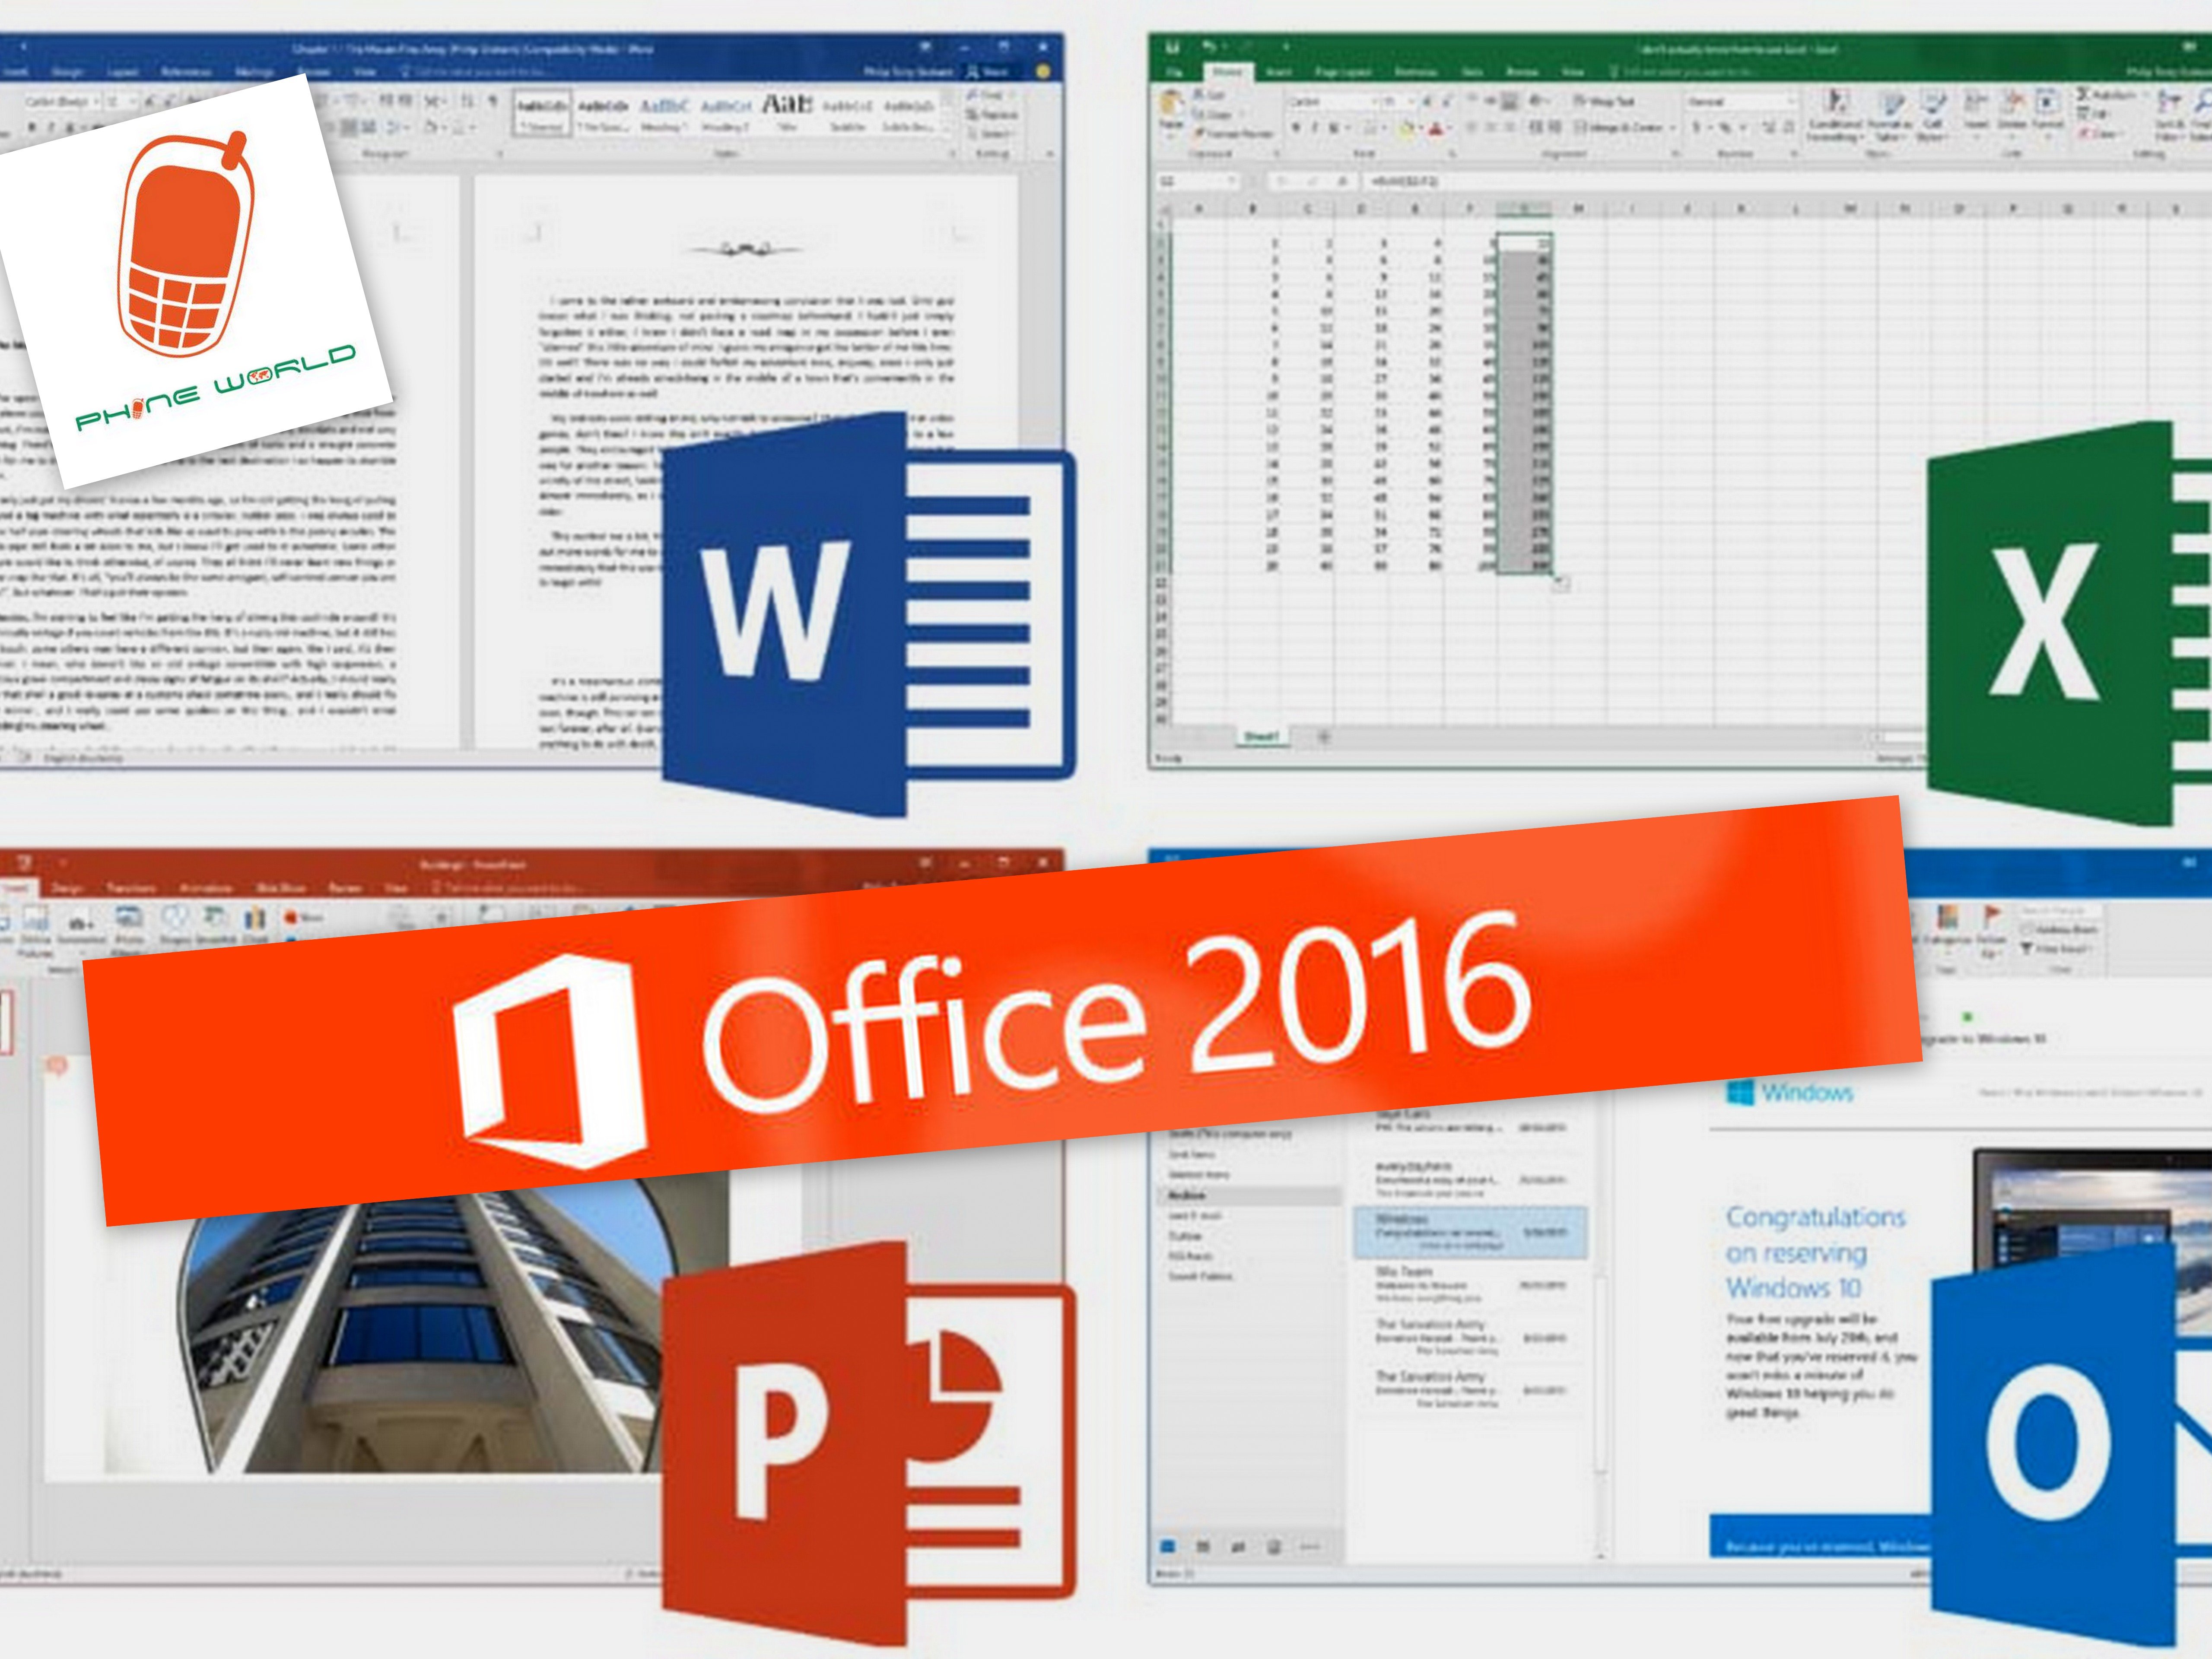 Office 2016 Expected to Launch on September 22, 2015